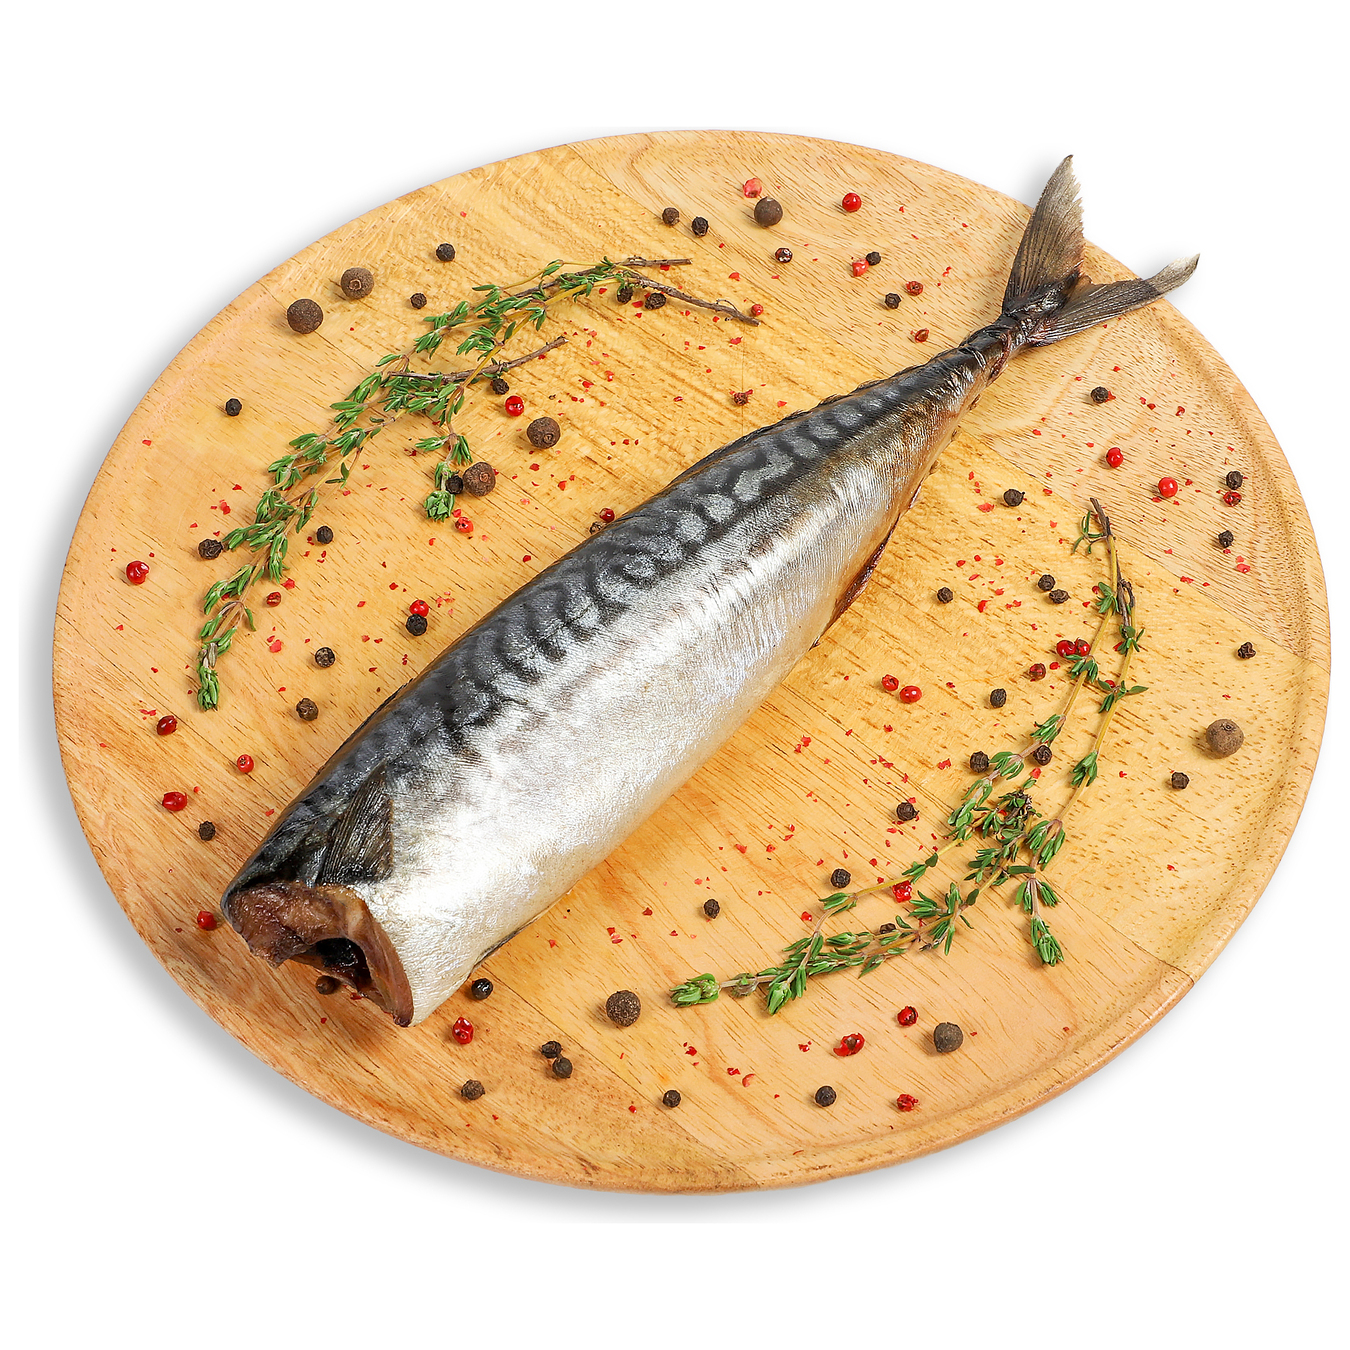 The mackerel of the Master of Taste is indicative of its own production of scales